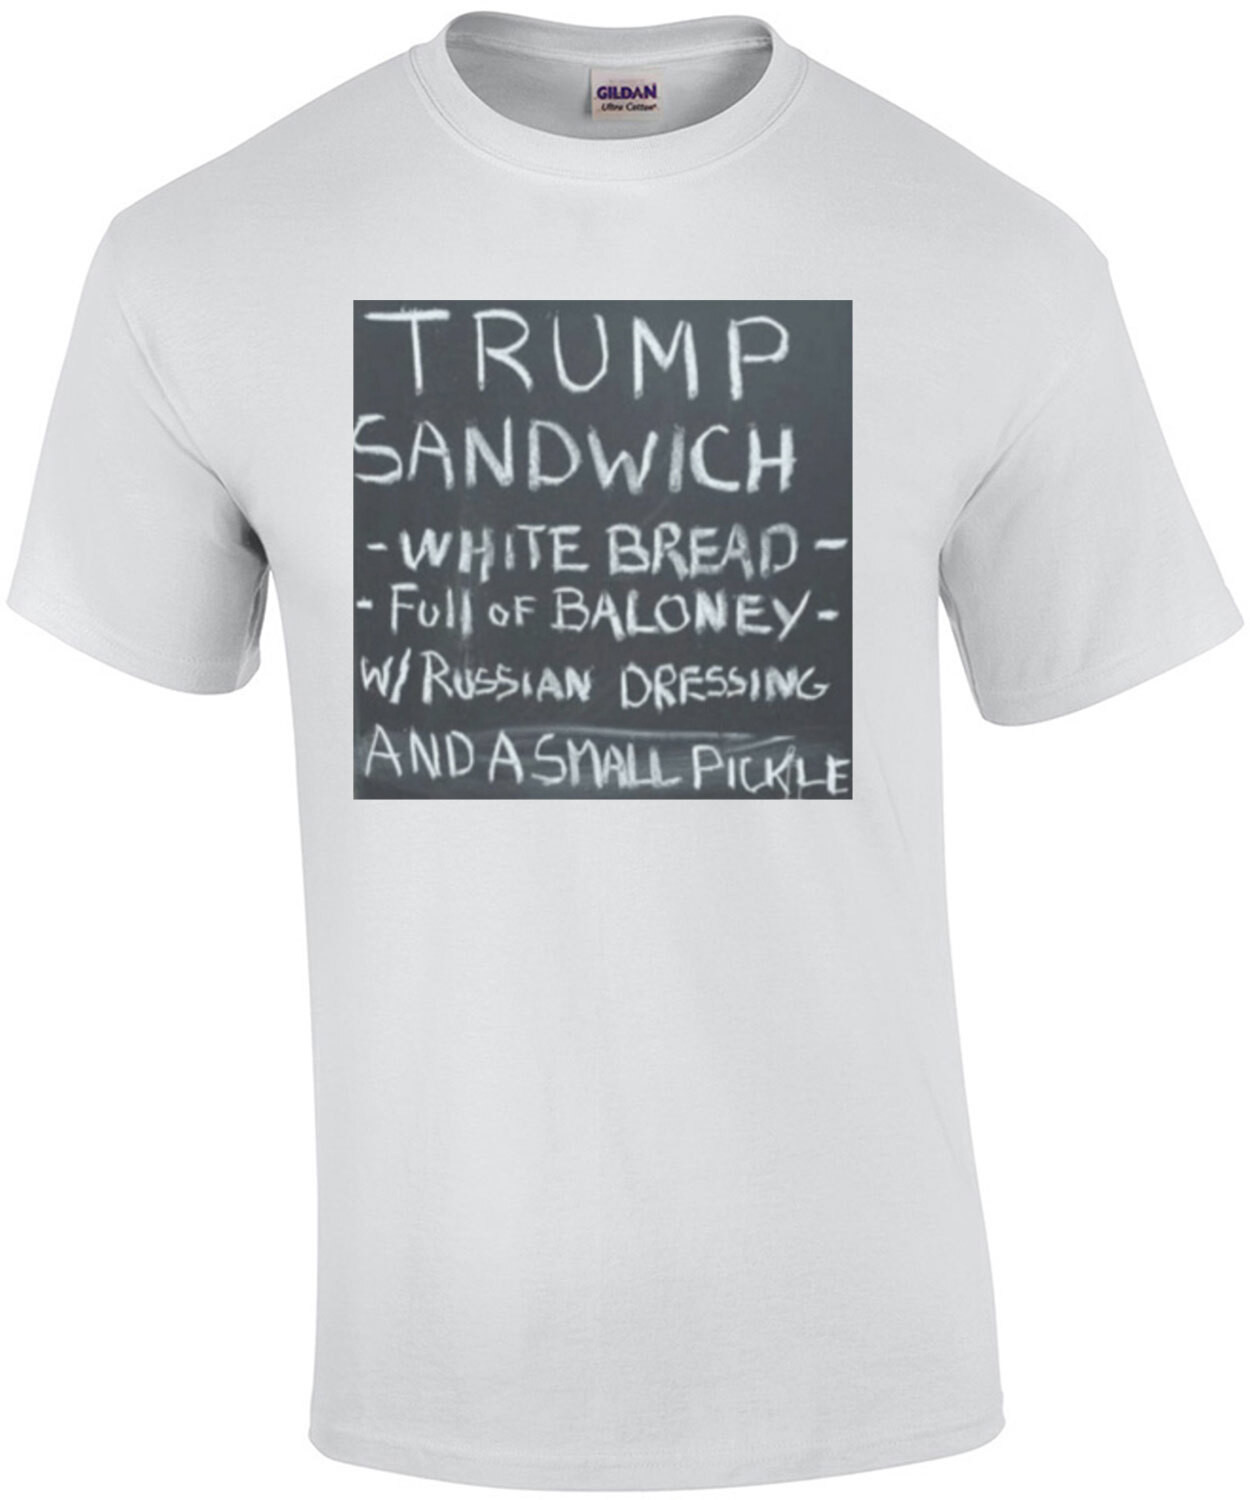 Trump Sandwich, white bread, full of baloney w/russian dressing and a small pickle - funny anti trump t-shirt